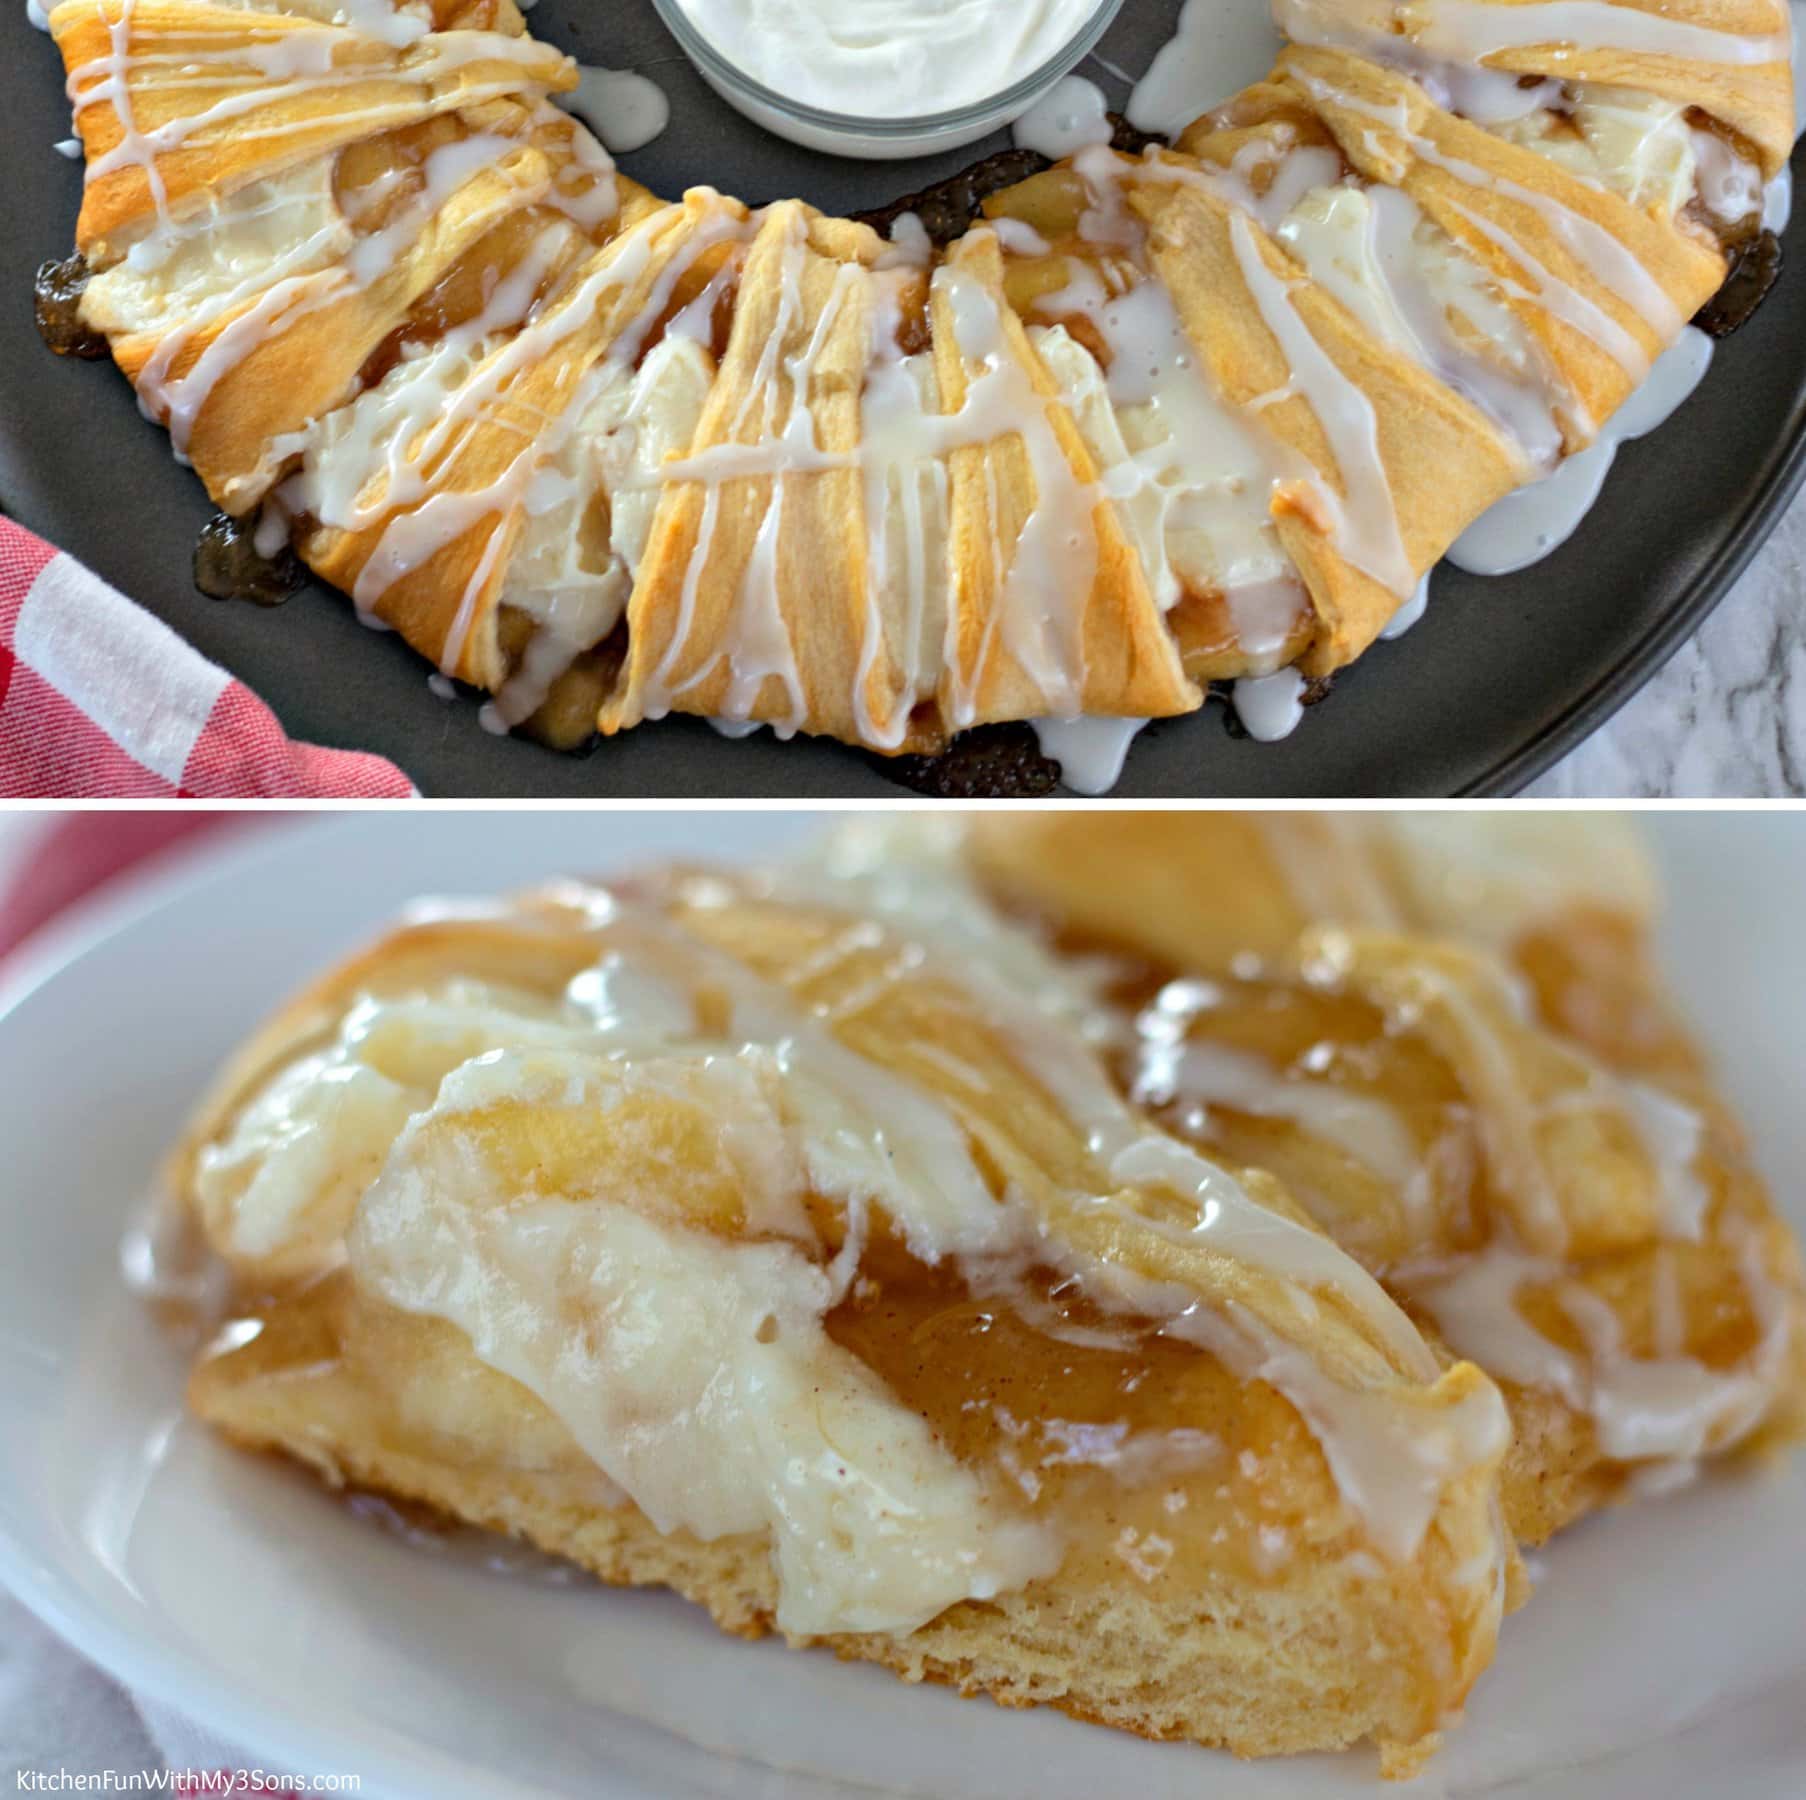 Two shots of Caramel Apple Crescent Ring, one on a black plate with a cup of glaze in the center, and the other a serving size portion on a white plate.